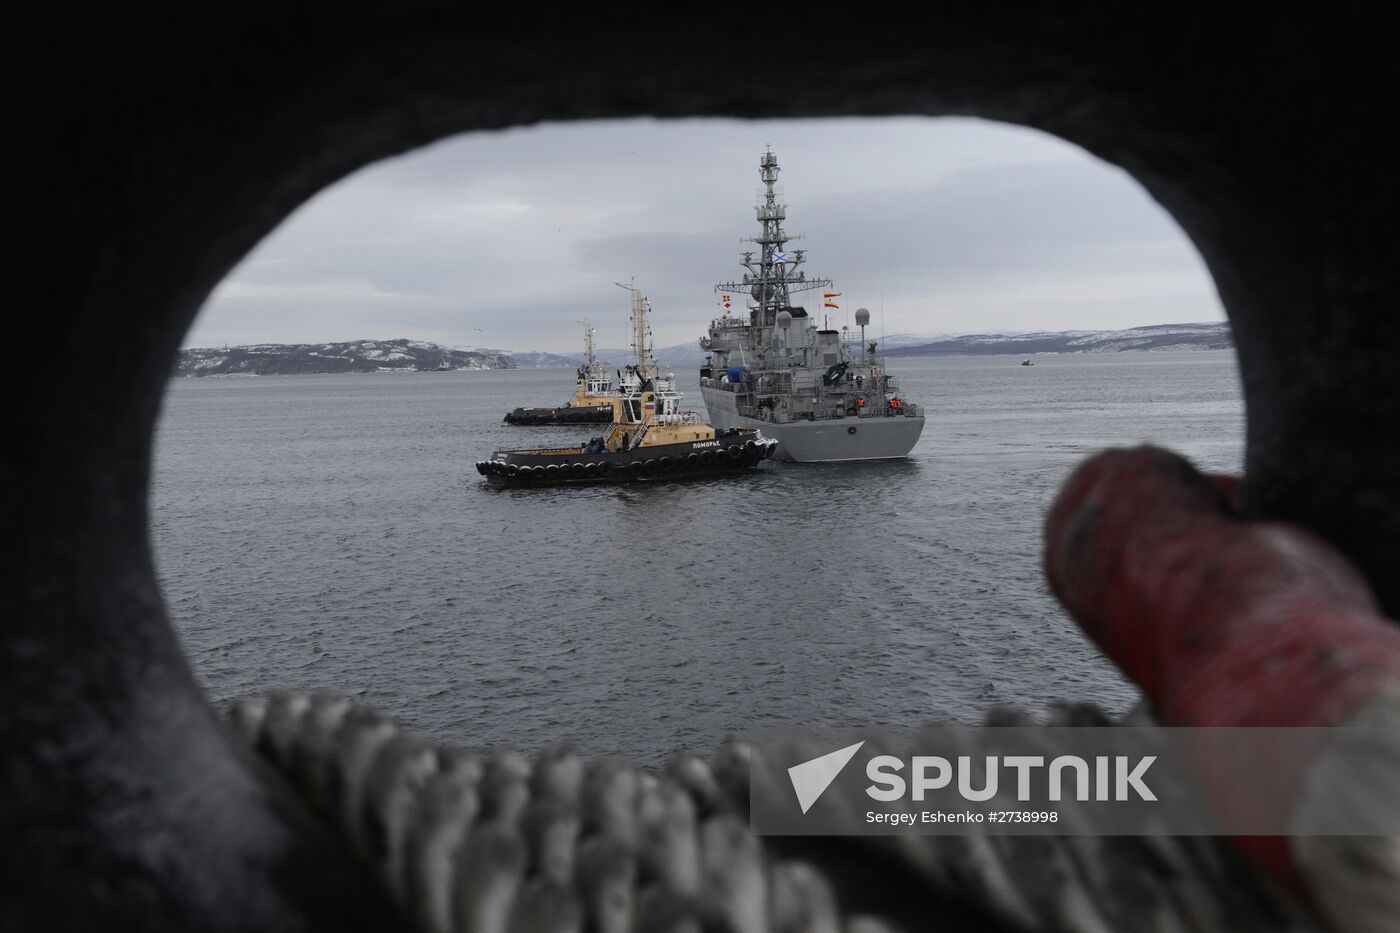 Arrival of new unconventional communcations vessel "Yury Ivanov" in Severomorsk